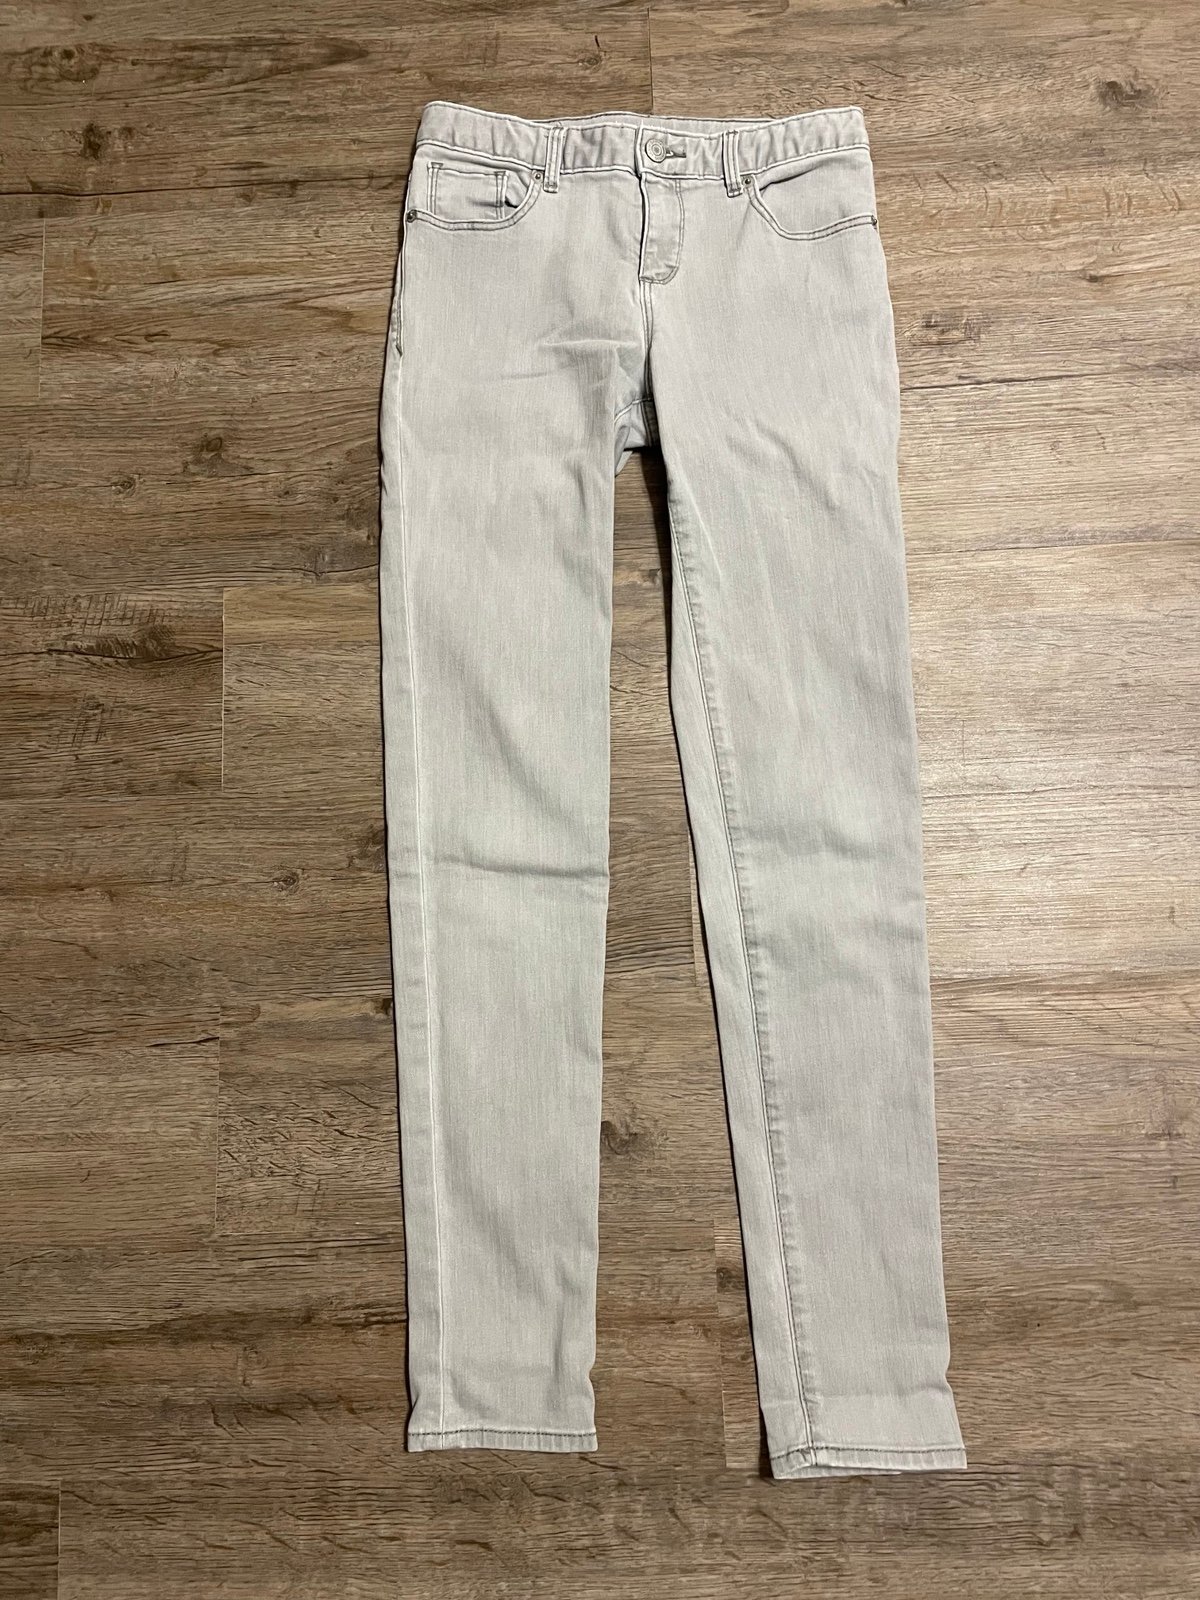 cheapest place to buy  Girls Gap Super Skinny Grey Jean